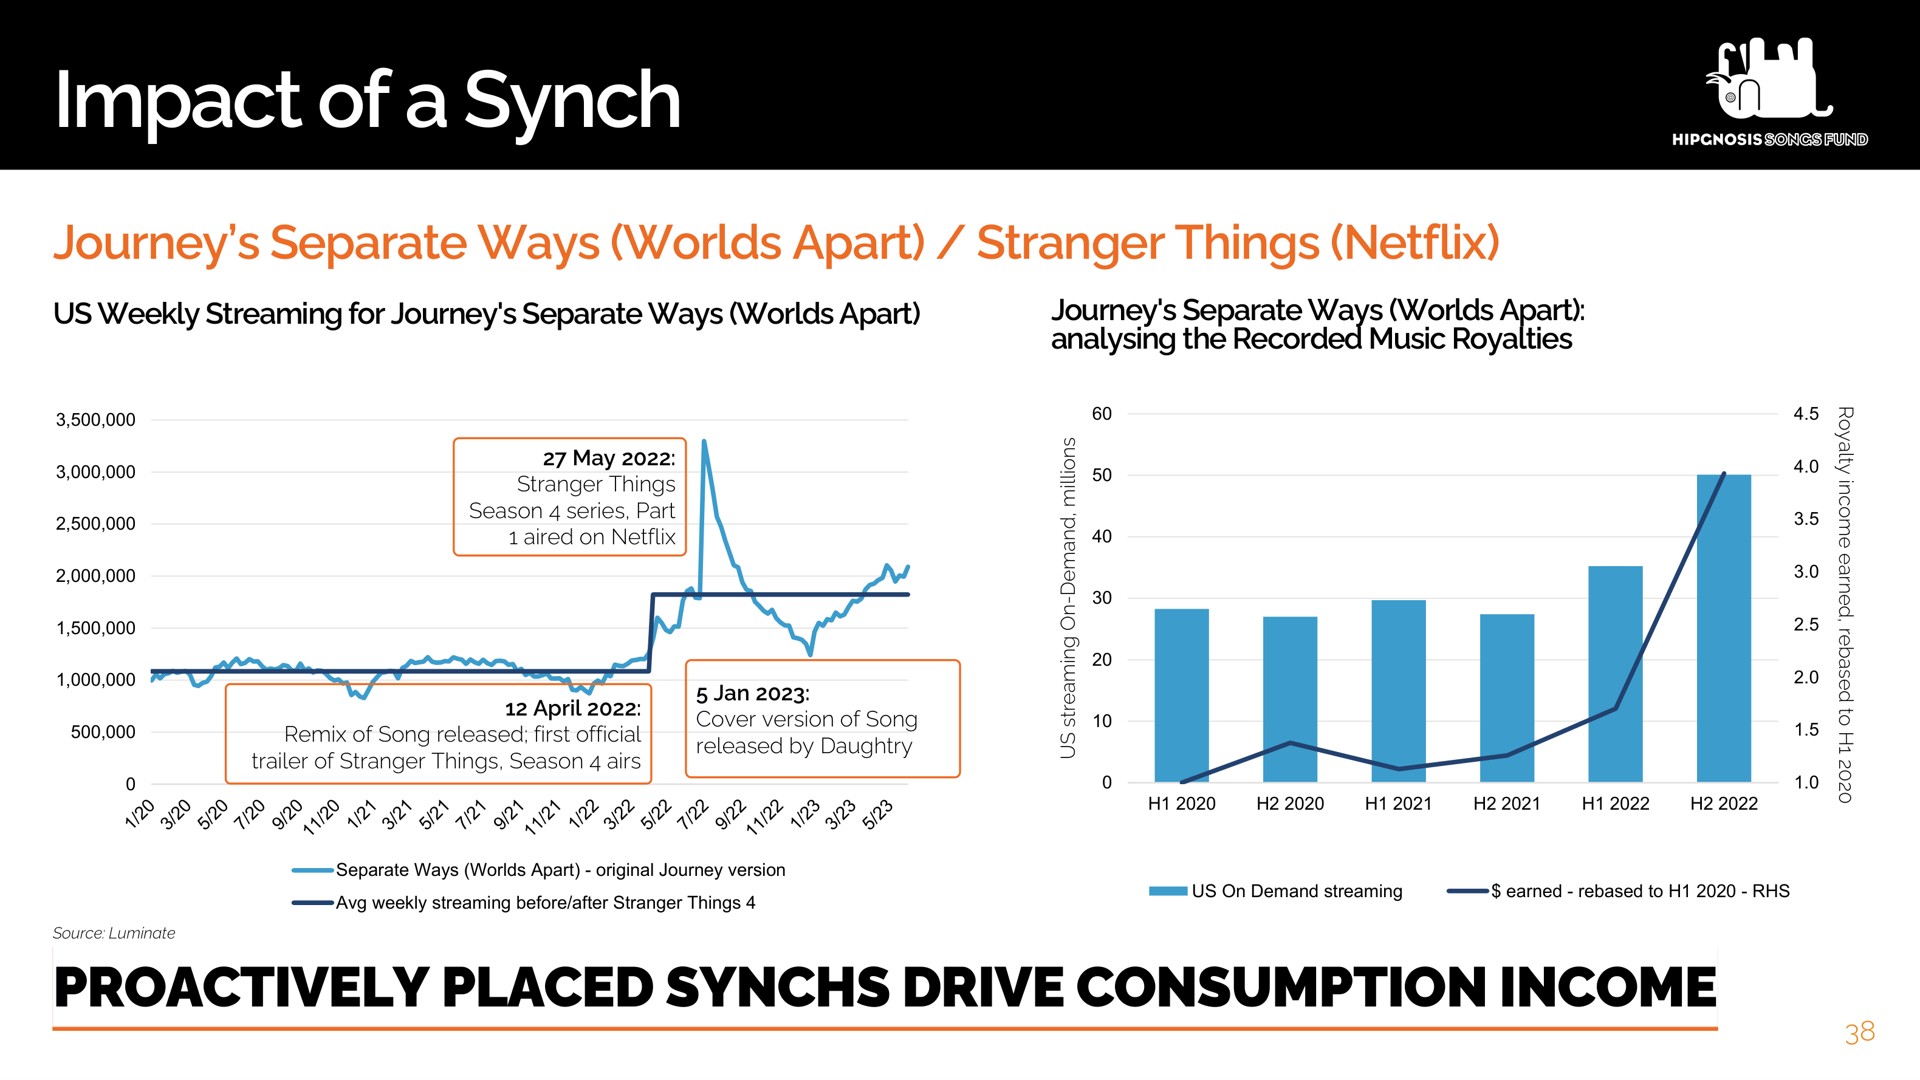 impact of a synch placed drive consumption income | Hipgnosis Songs Fund